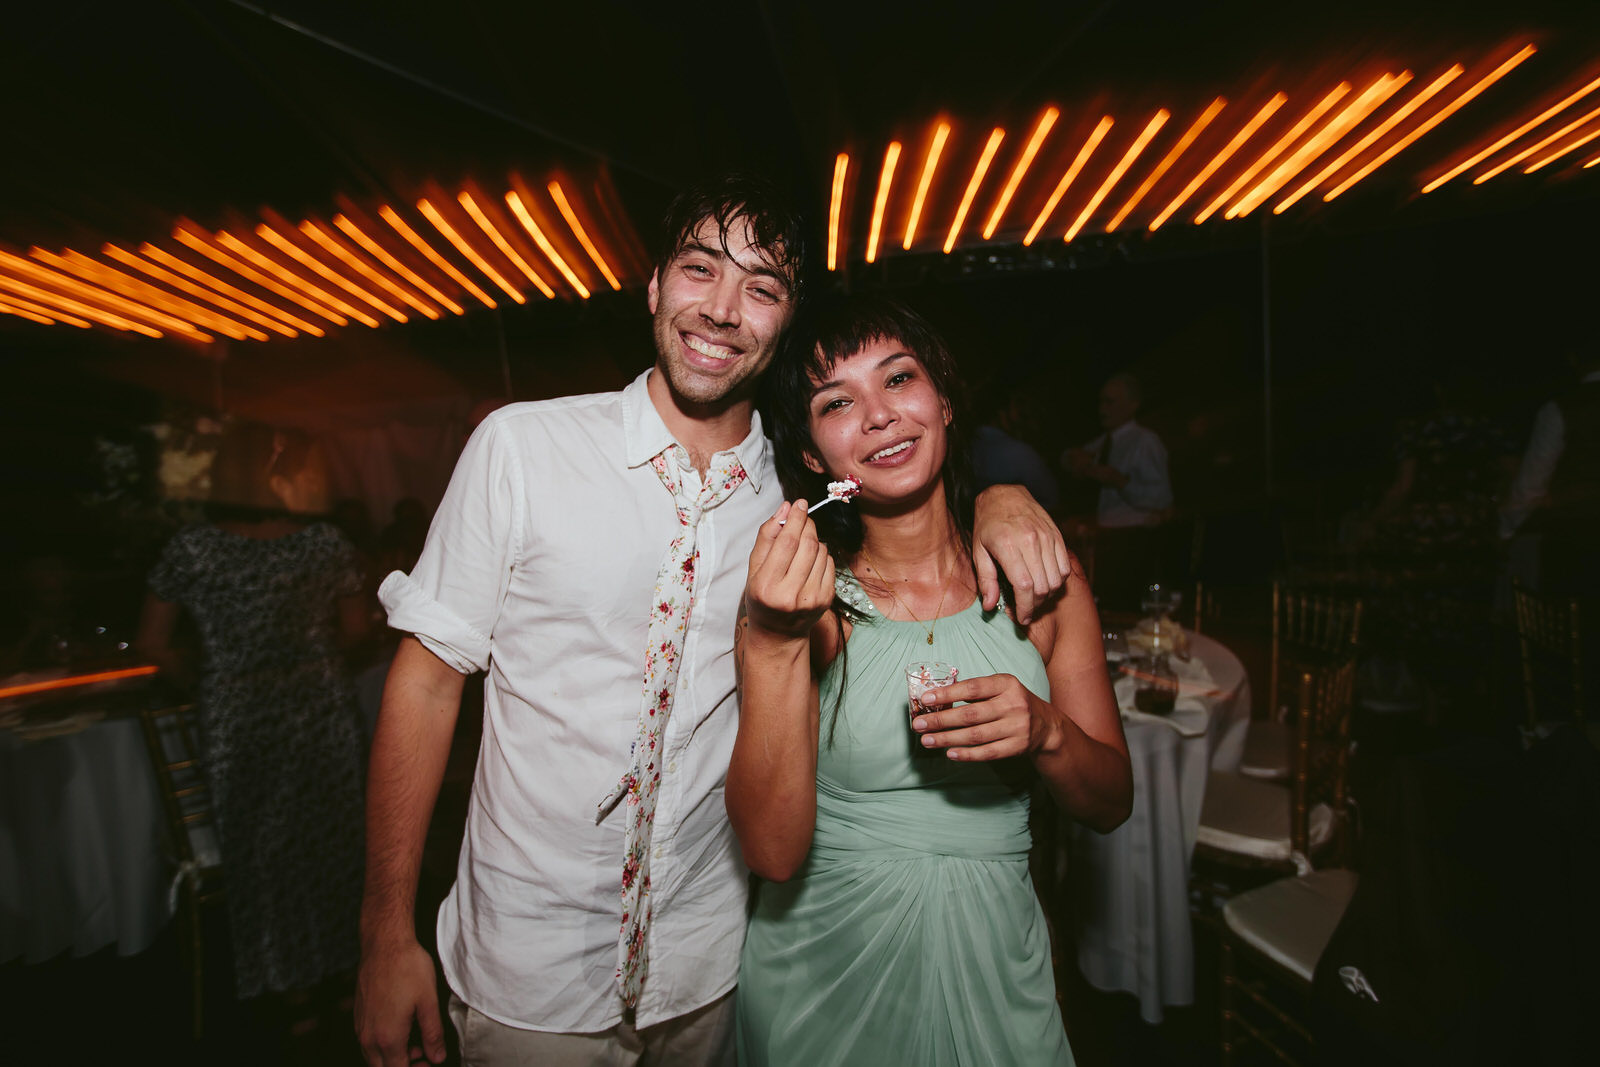 wedding_reception_drunk_guests_tiny_house_photo.jpg